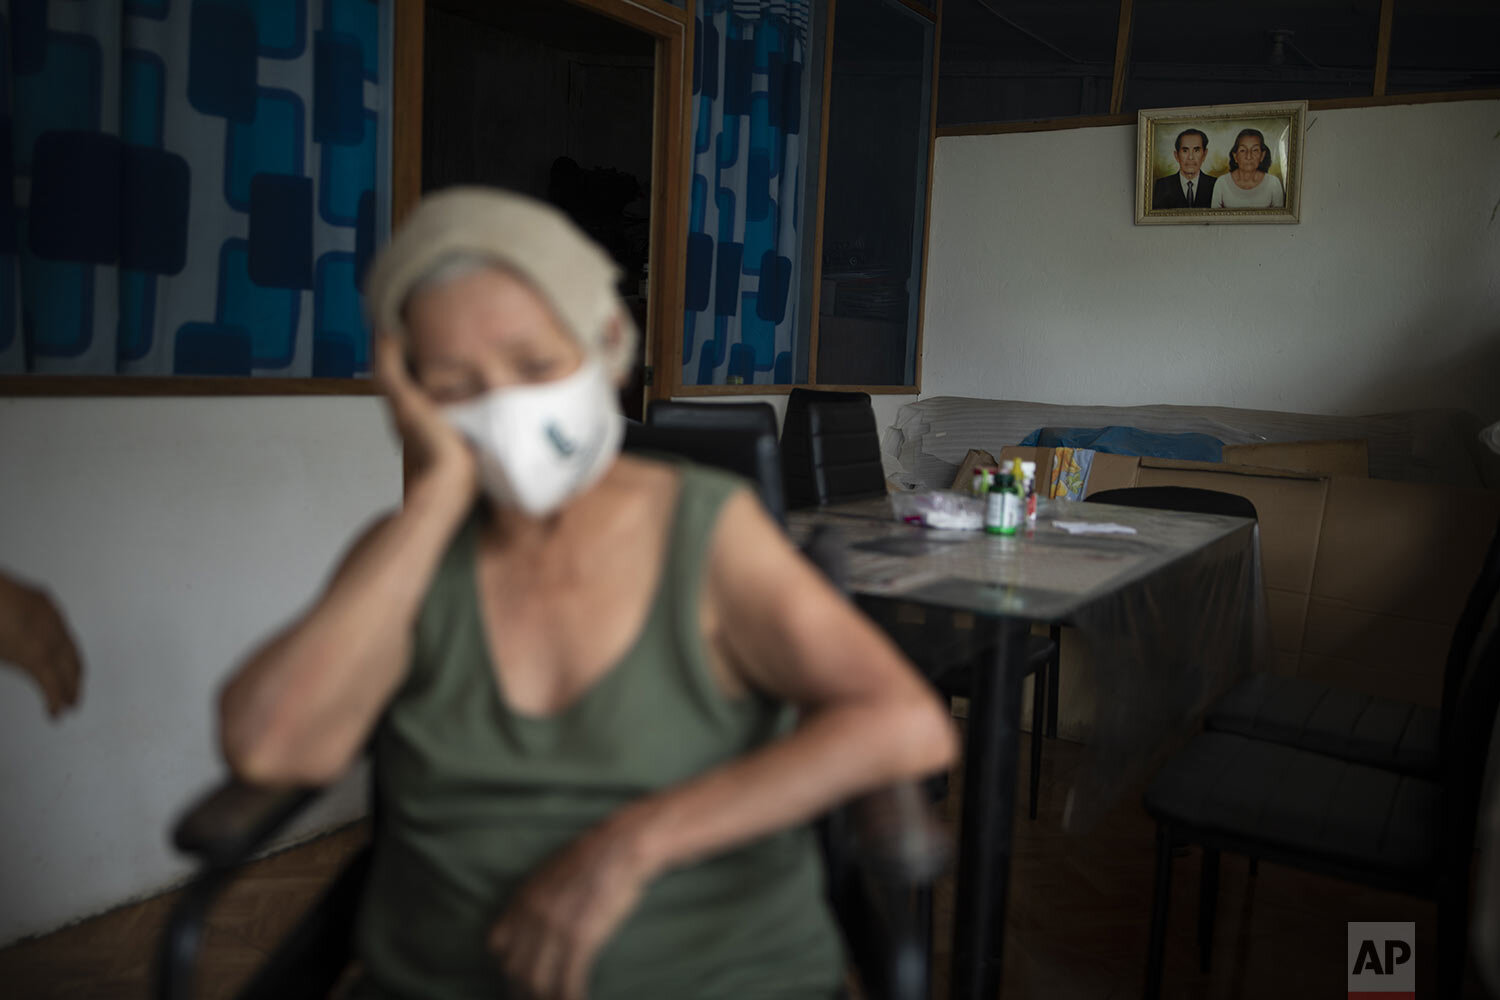  Suffering from a high fever related to dengue, 72-year-old Luz Rengifo rests inside her home, in Pucallpa, in Peru’s Ucayali region, Tuesday, Sept. 29, 2020. (AP Photo/Rodrigo Abd) 